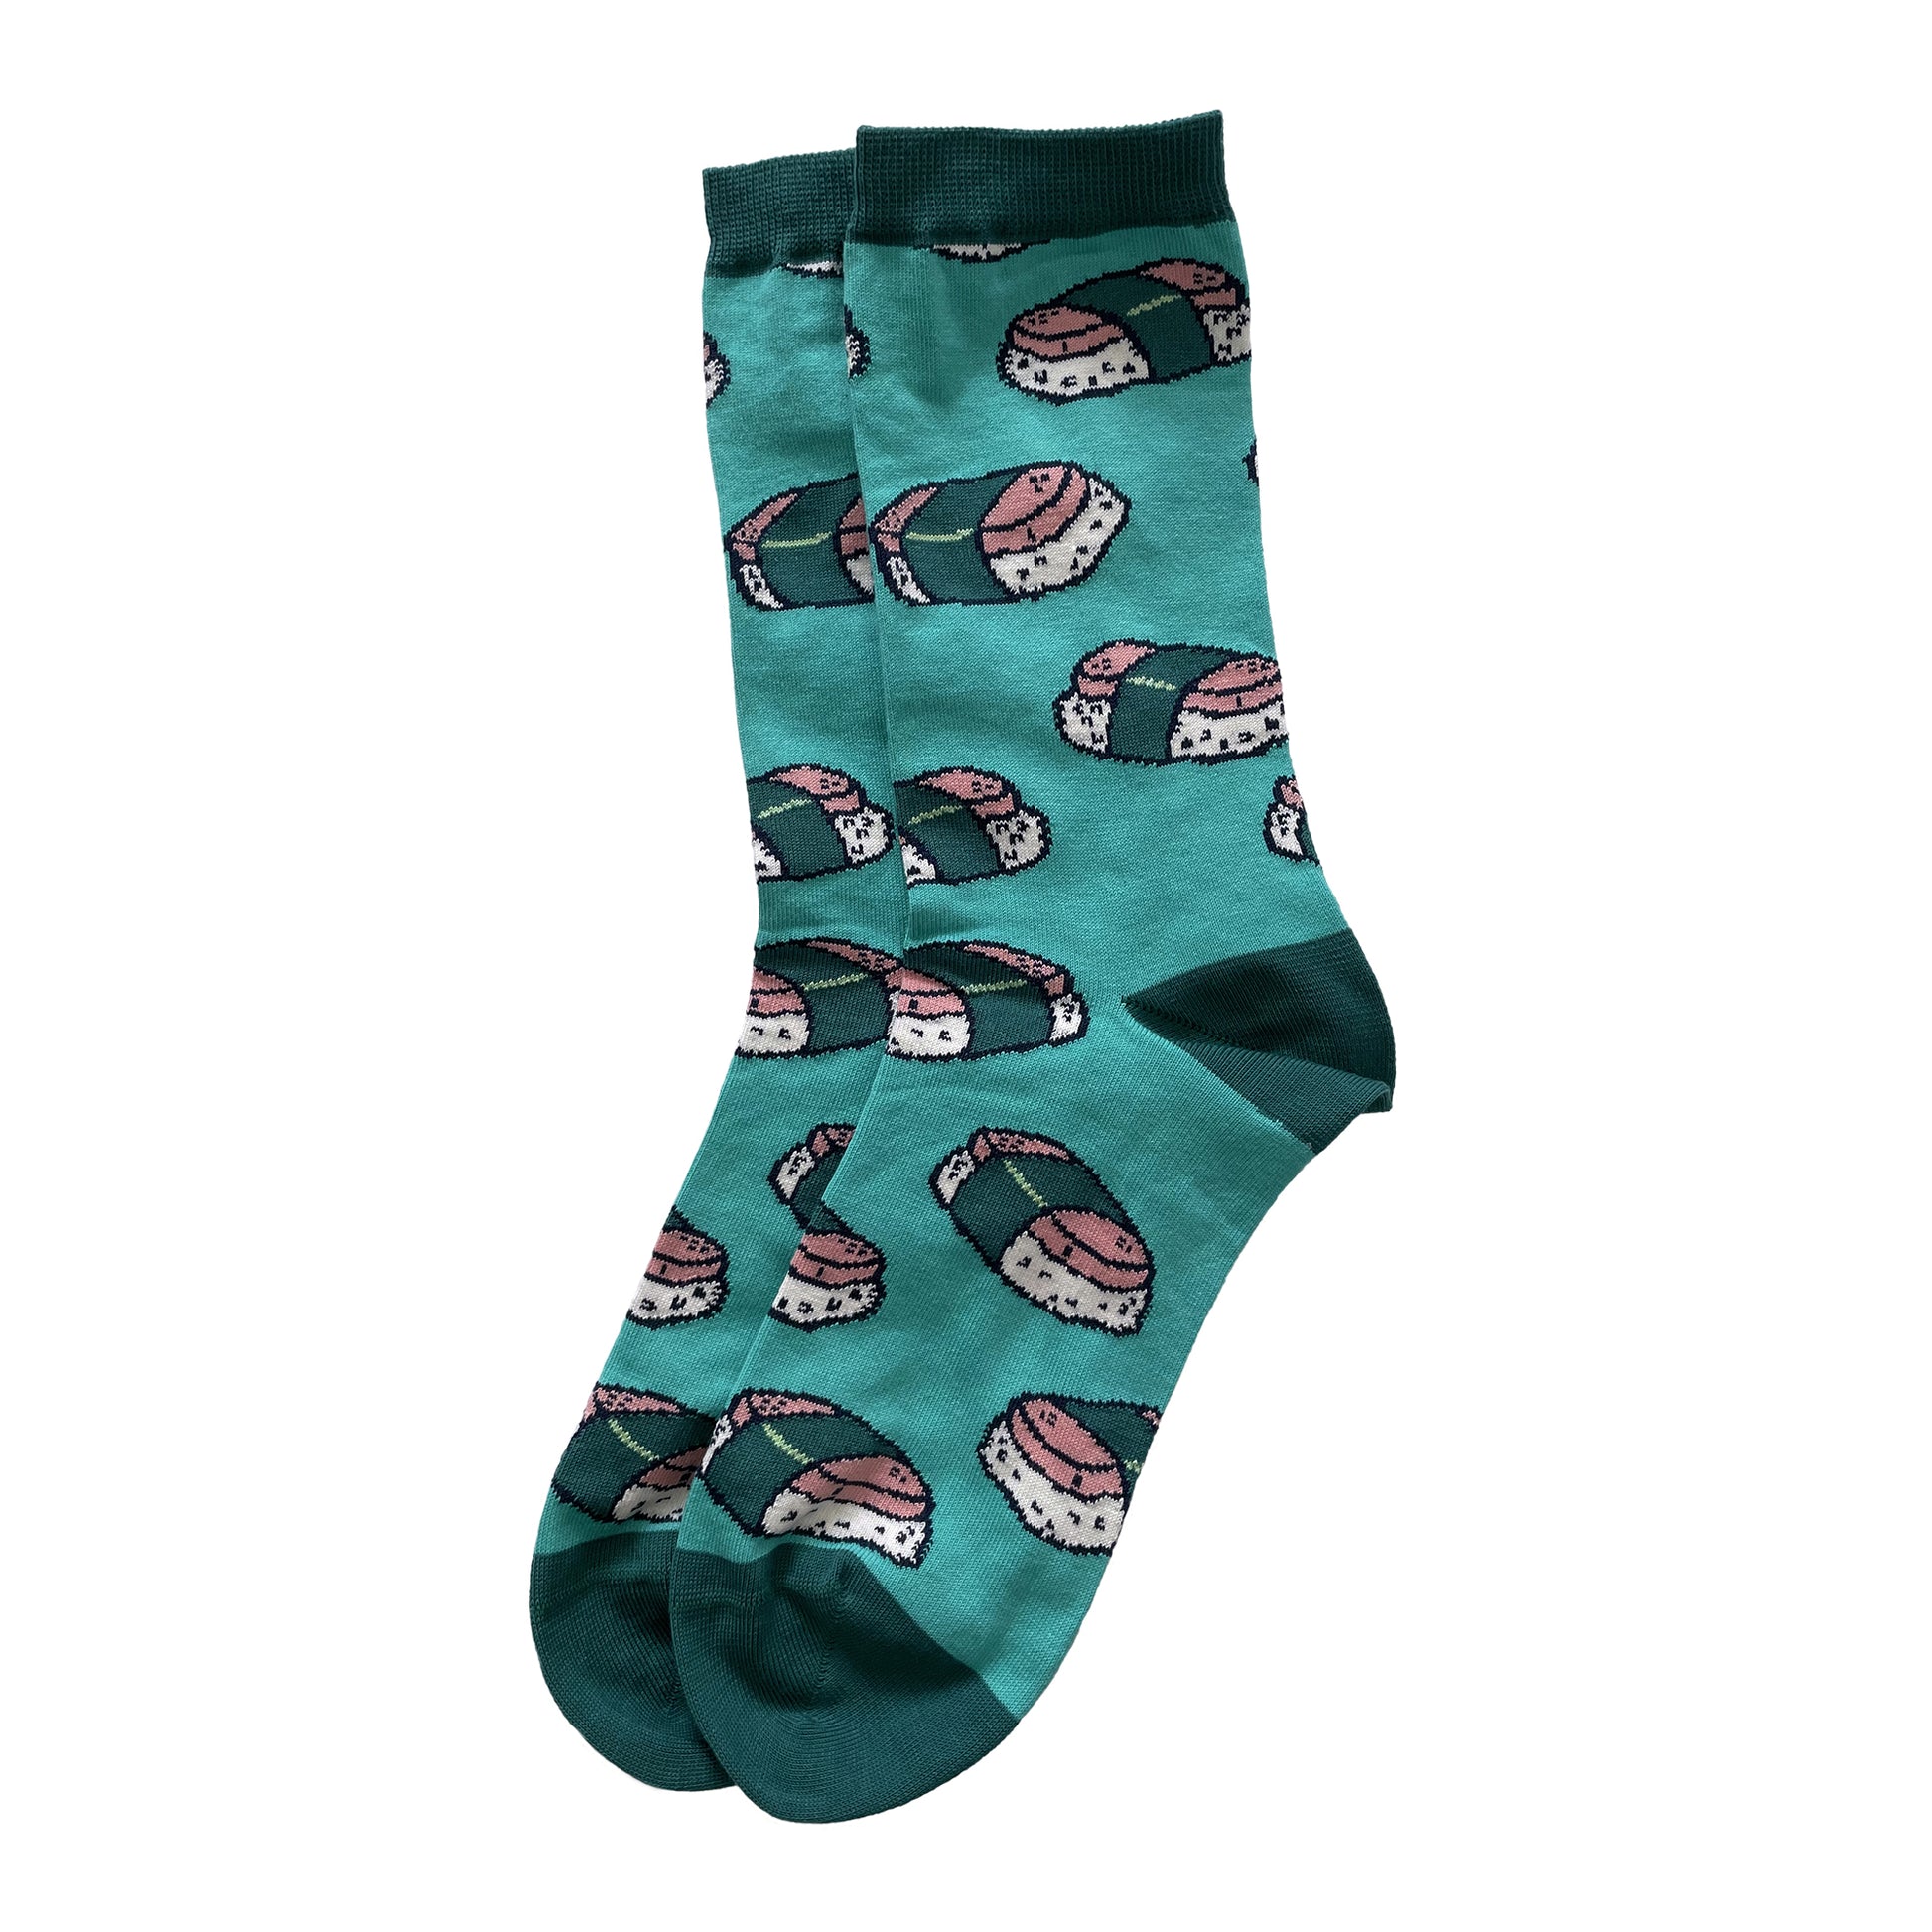 A pair of turquoise socks with green cuffs, toes and heels is patterned with pink and green musubi-style sushi.